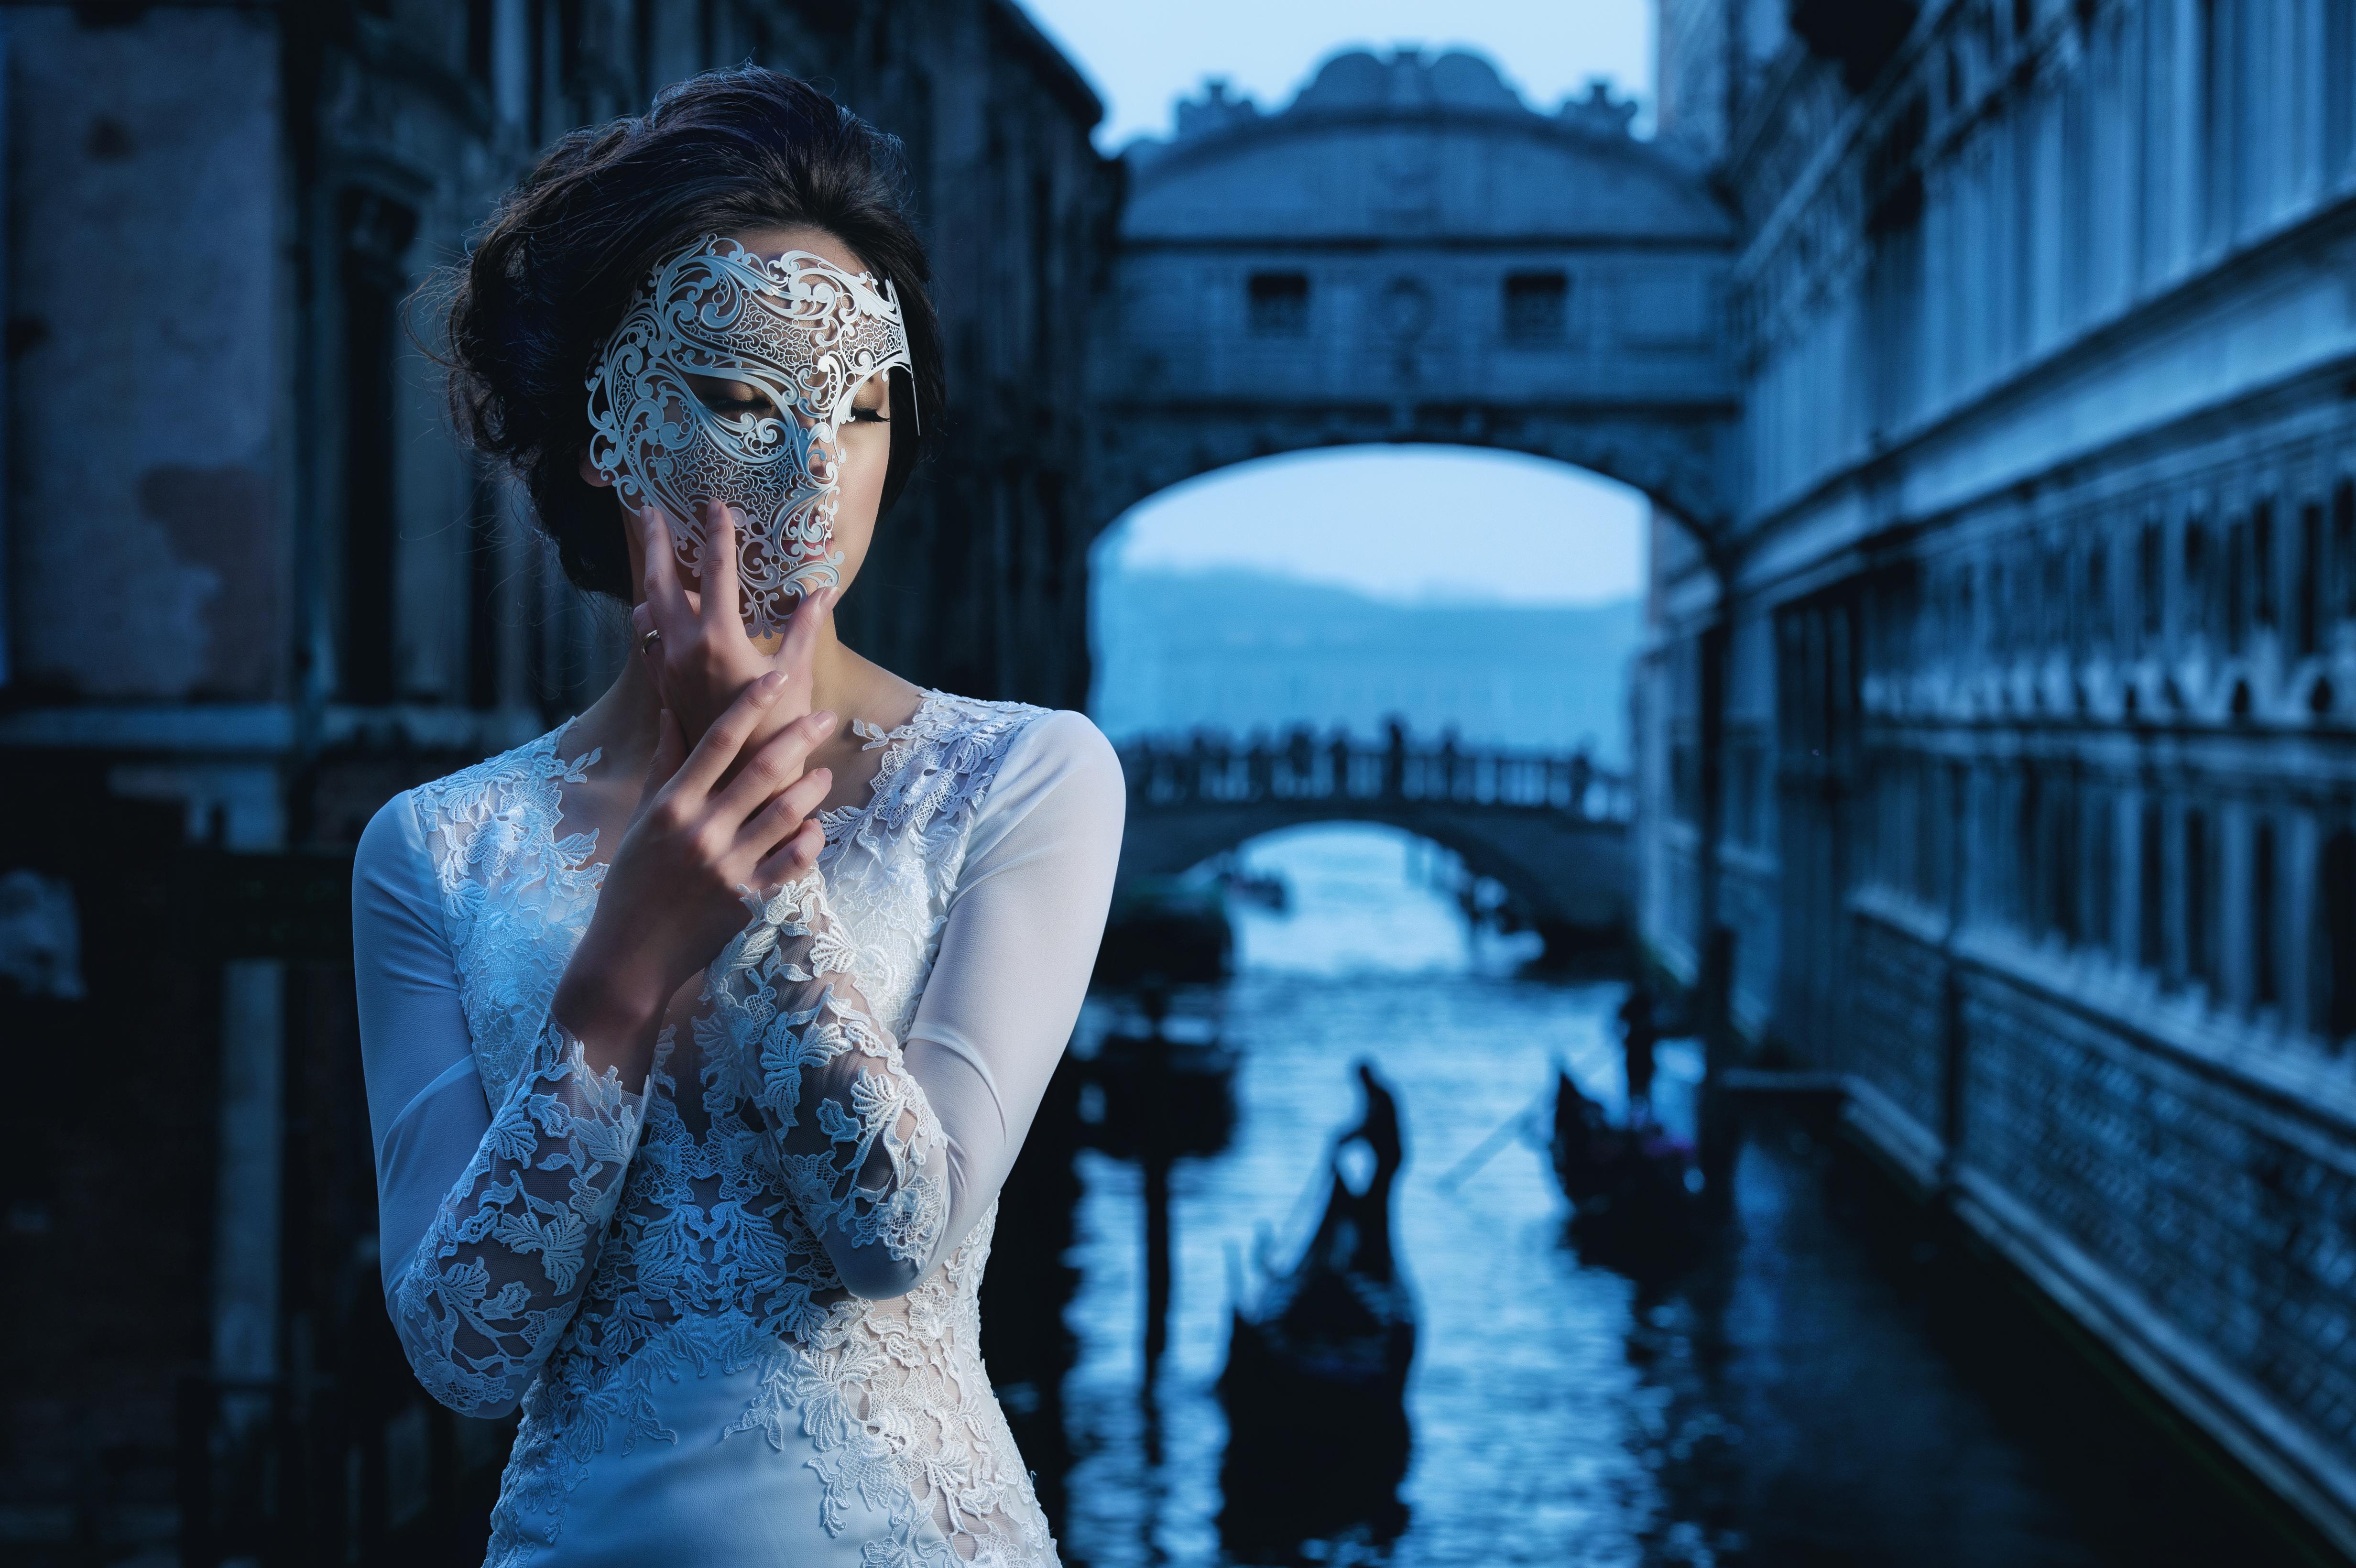 Download 4928x3280 carnival of venice, venice, italy, canal, women